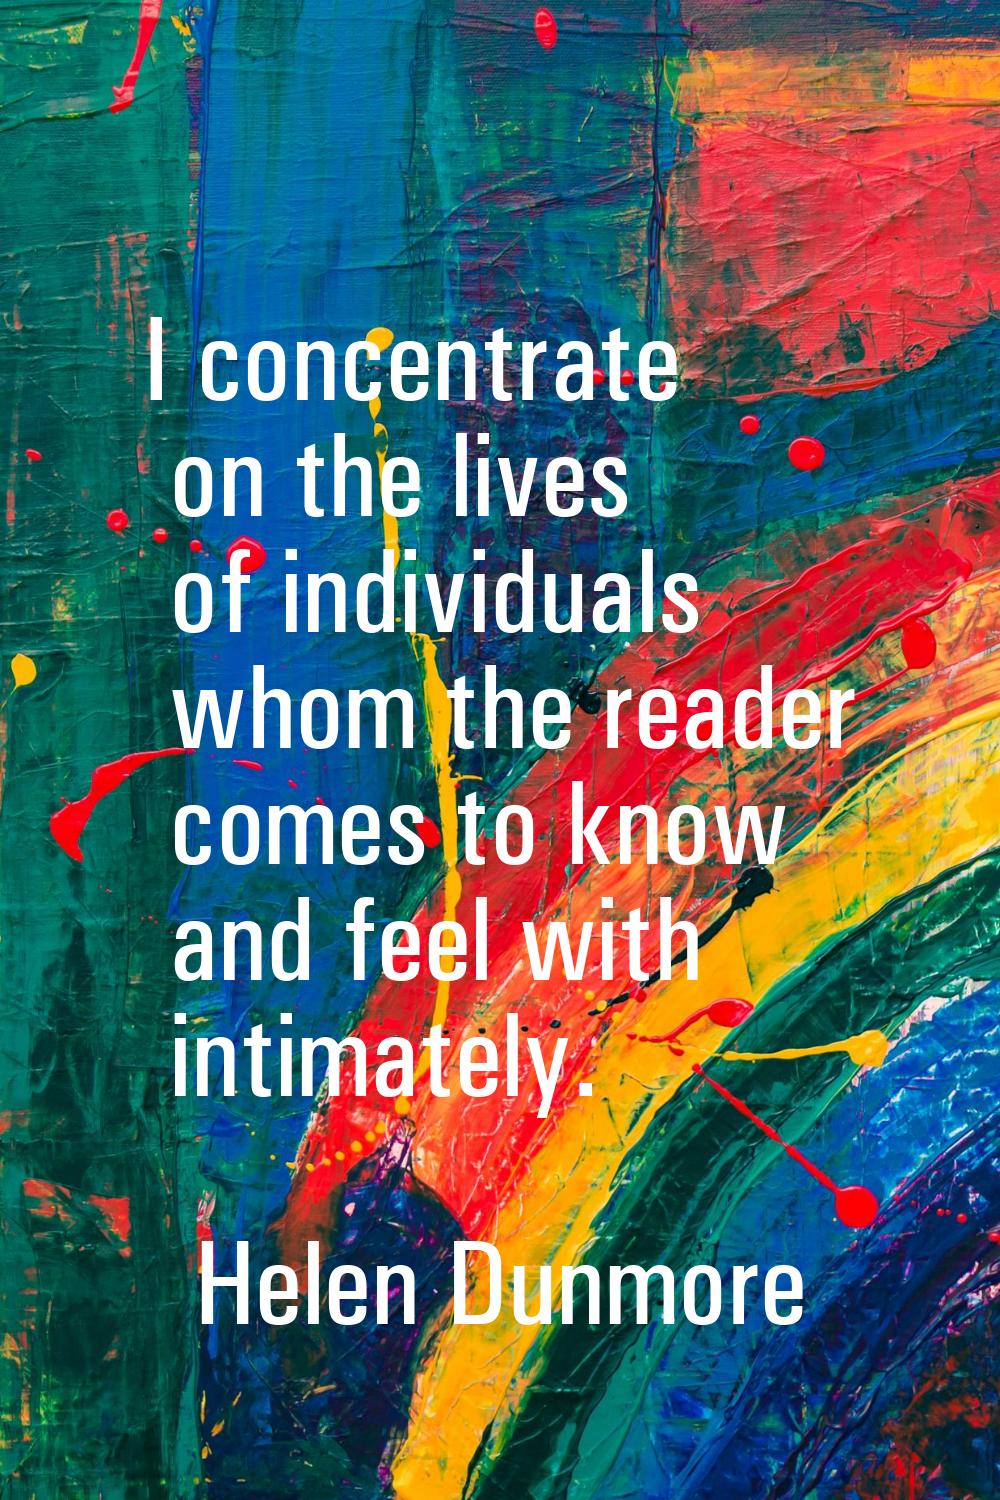 I concentrate on the lives of individuals whom the reader comes to know and feel with intimately.